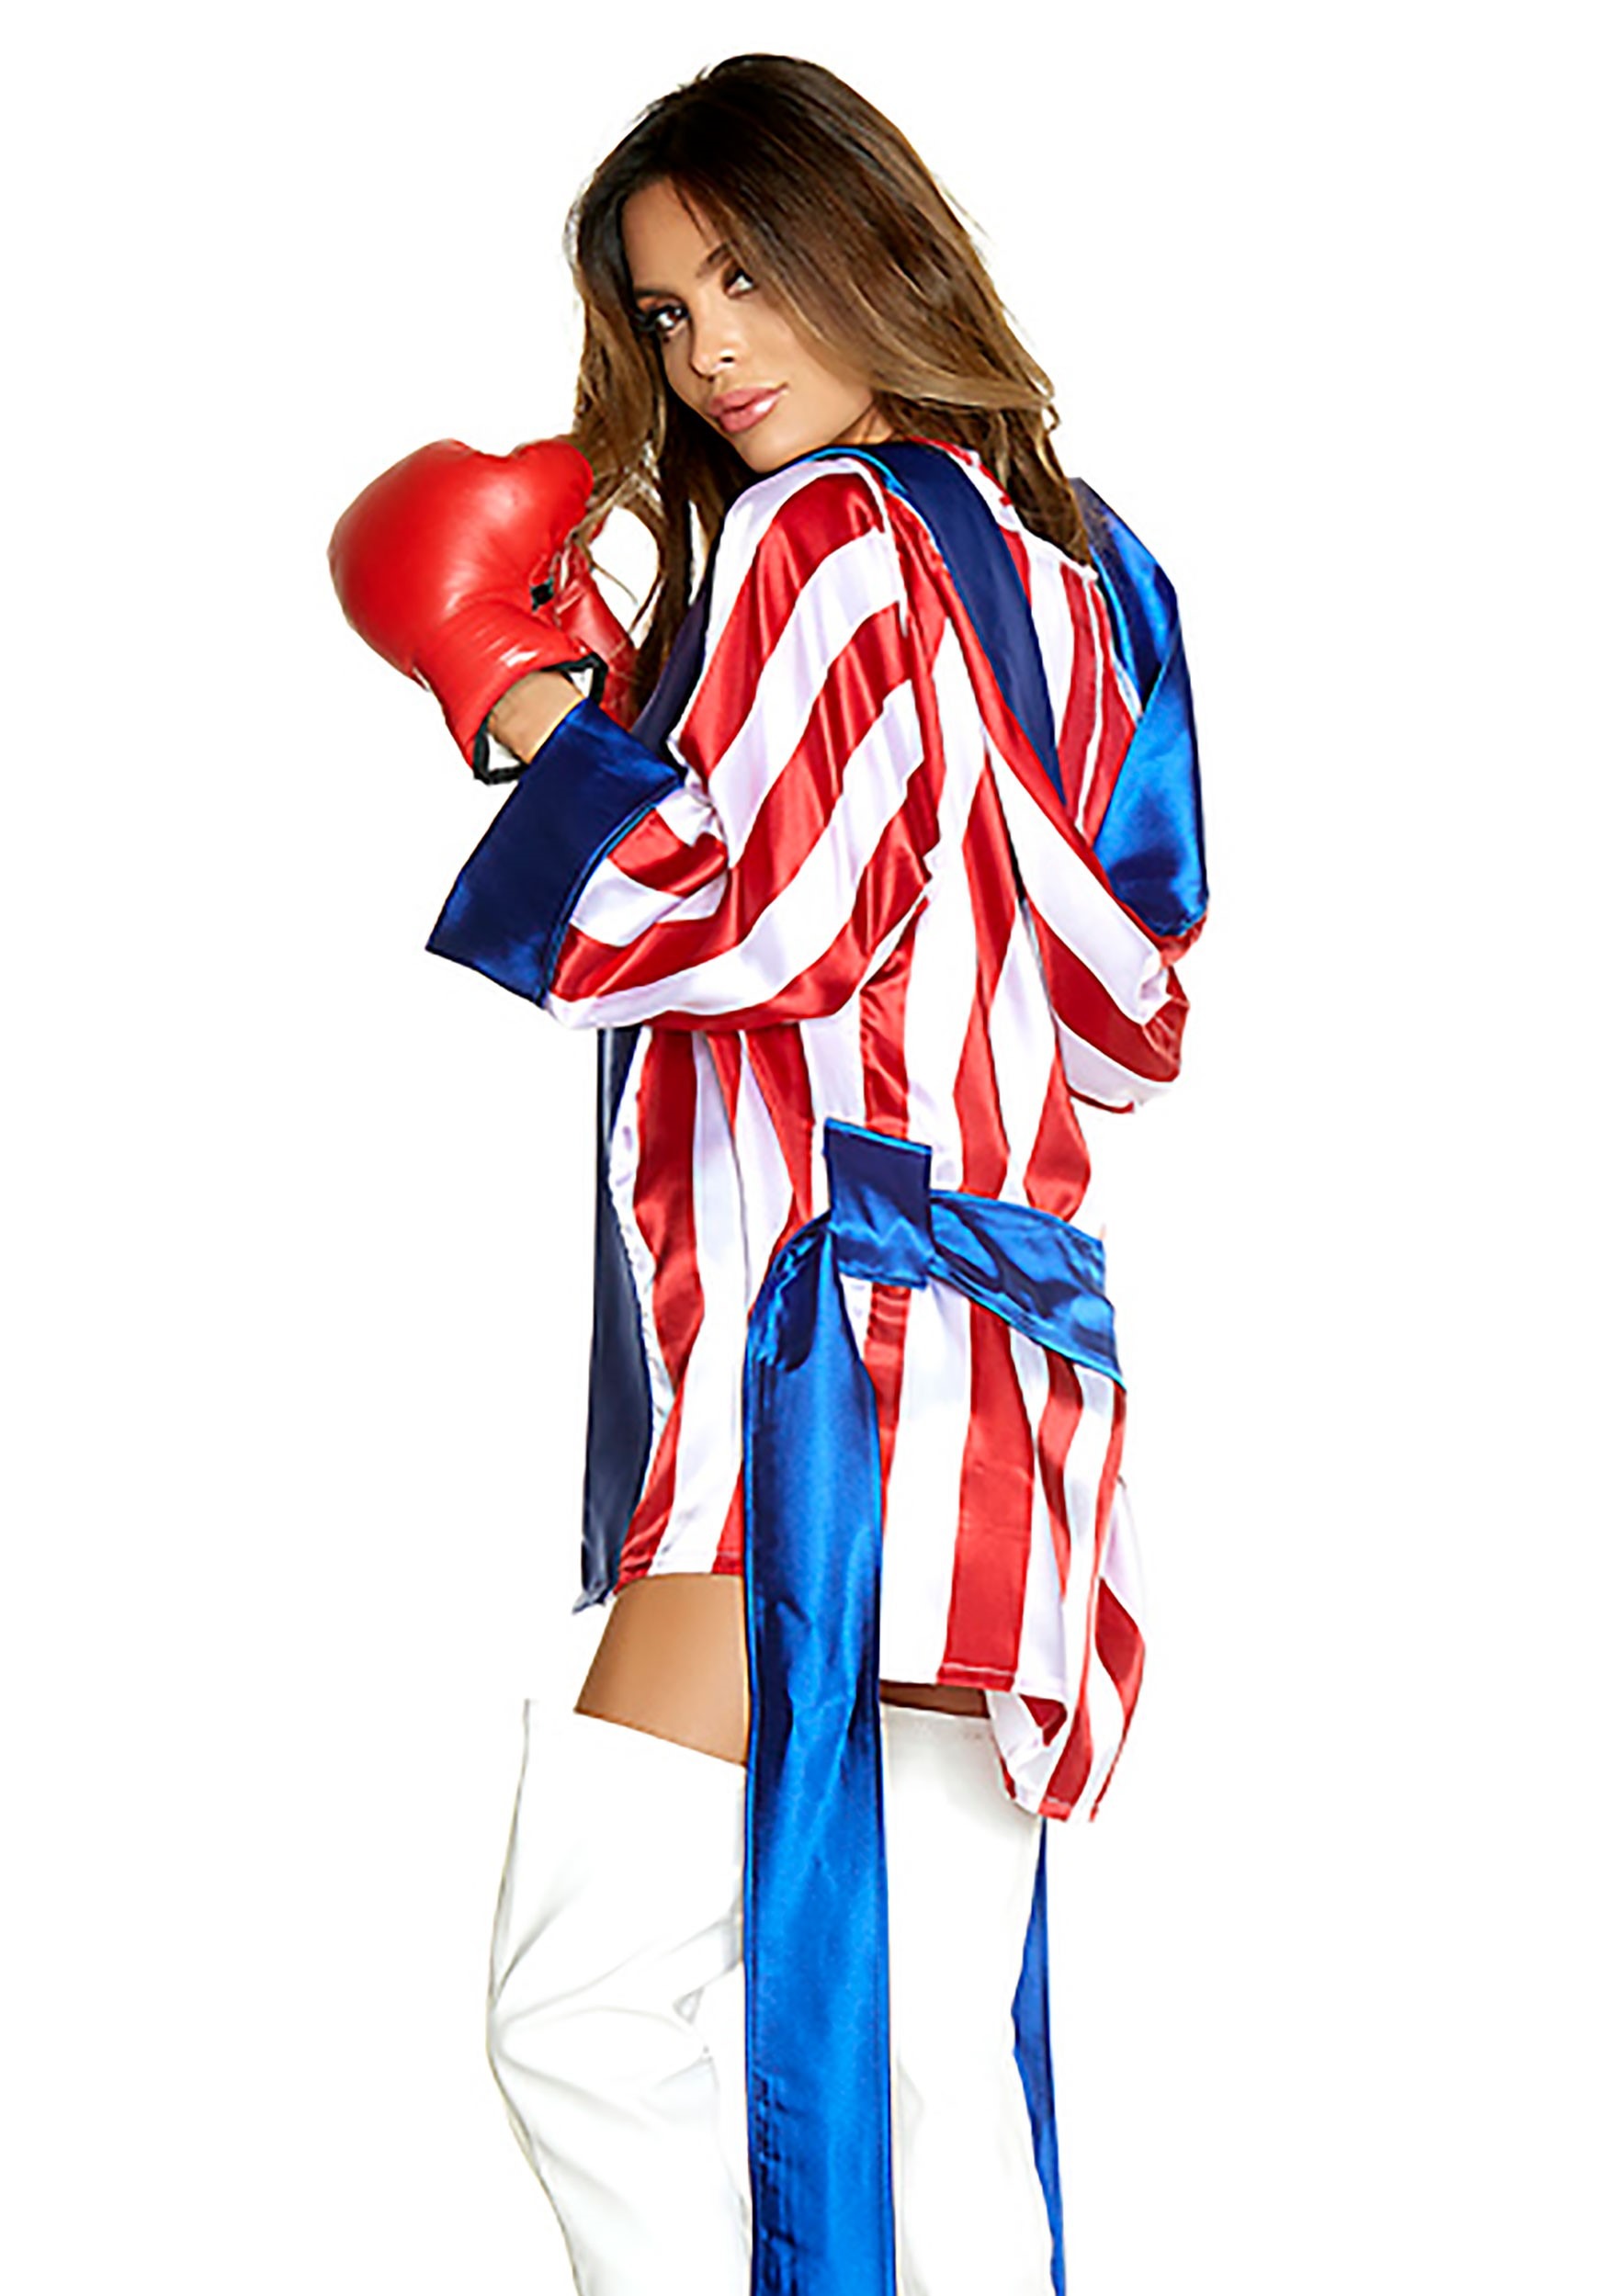 Sexy Get 'Em Champ Boxer Costume For Women